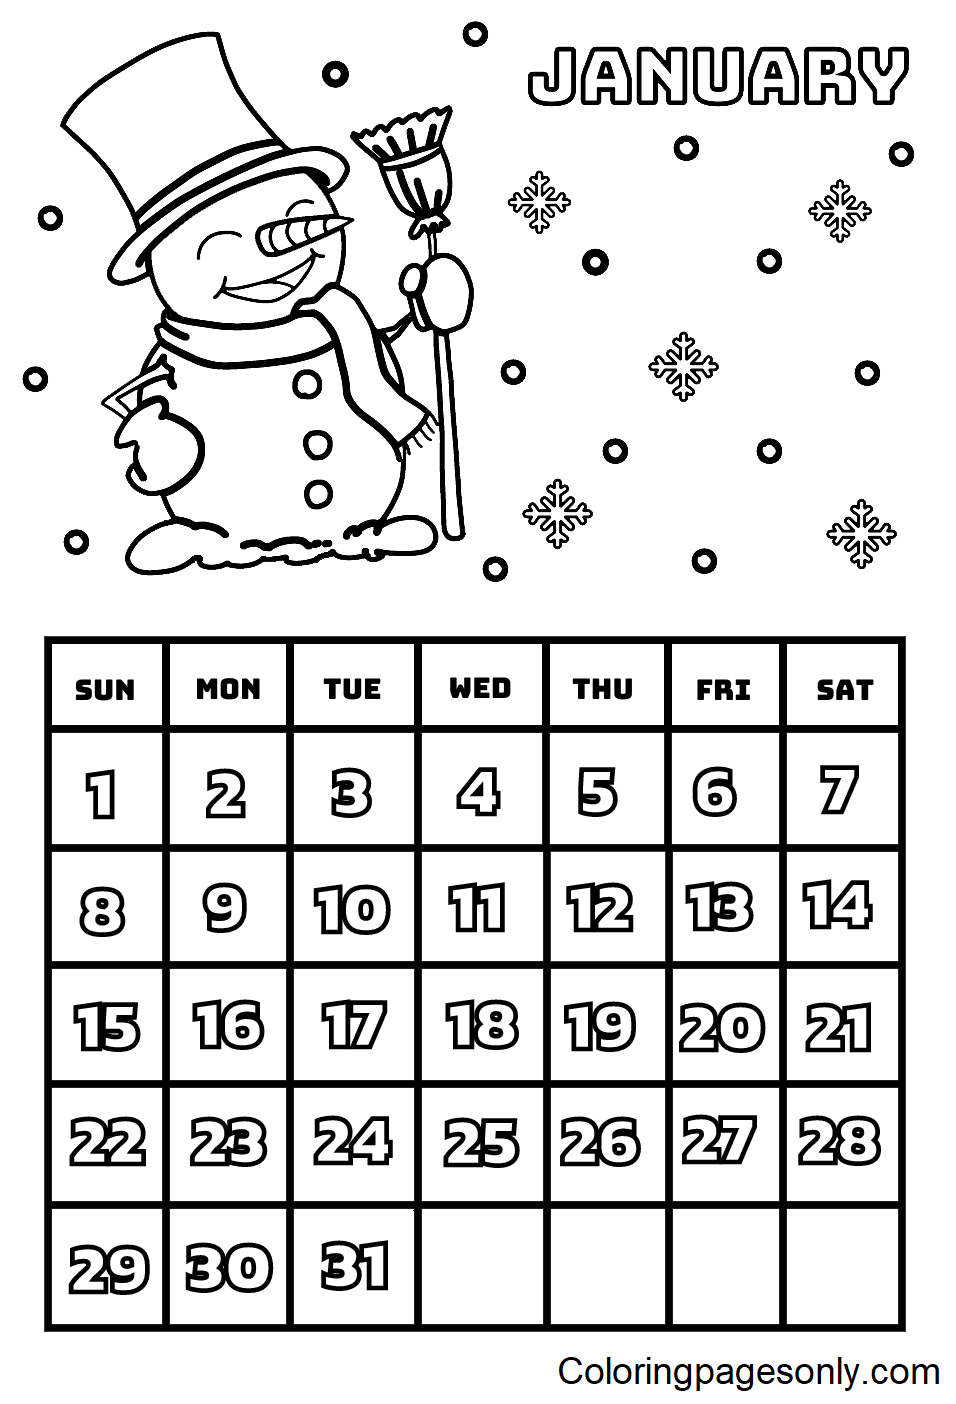 January 2023 calendar Coloring Page